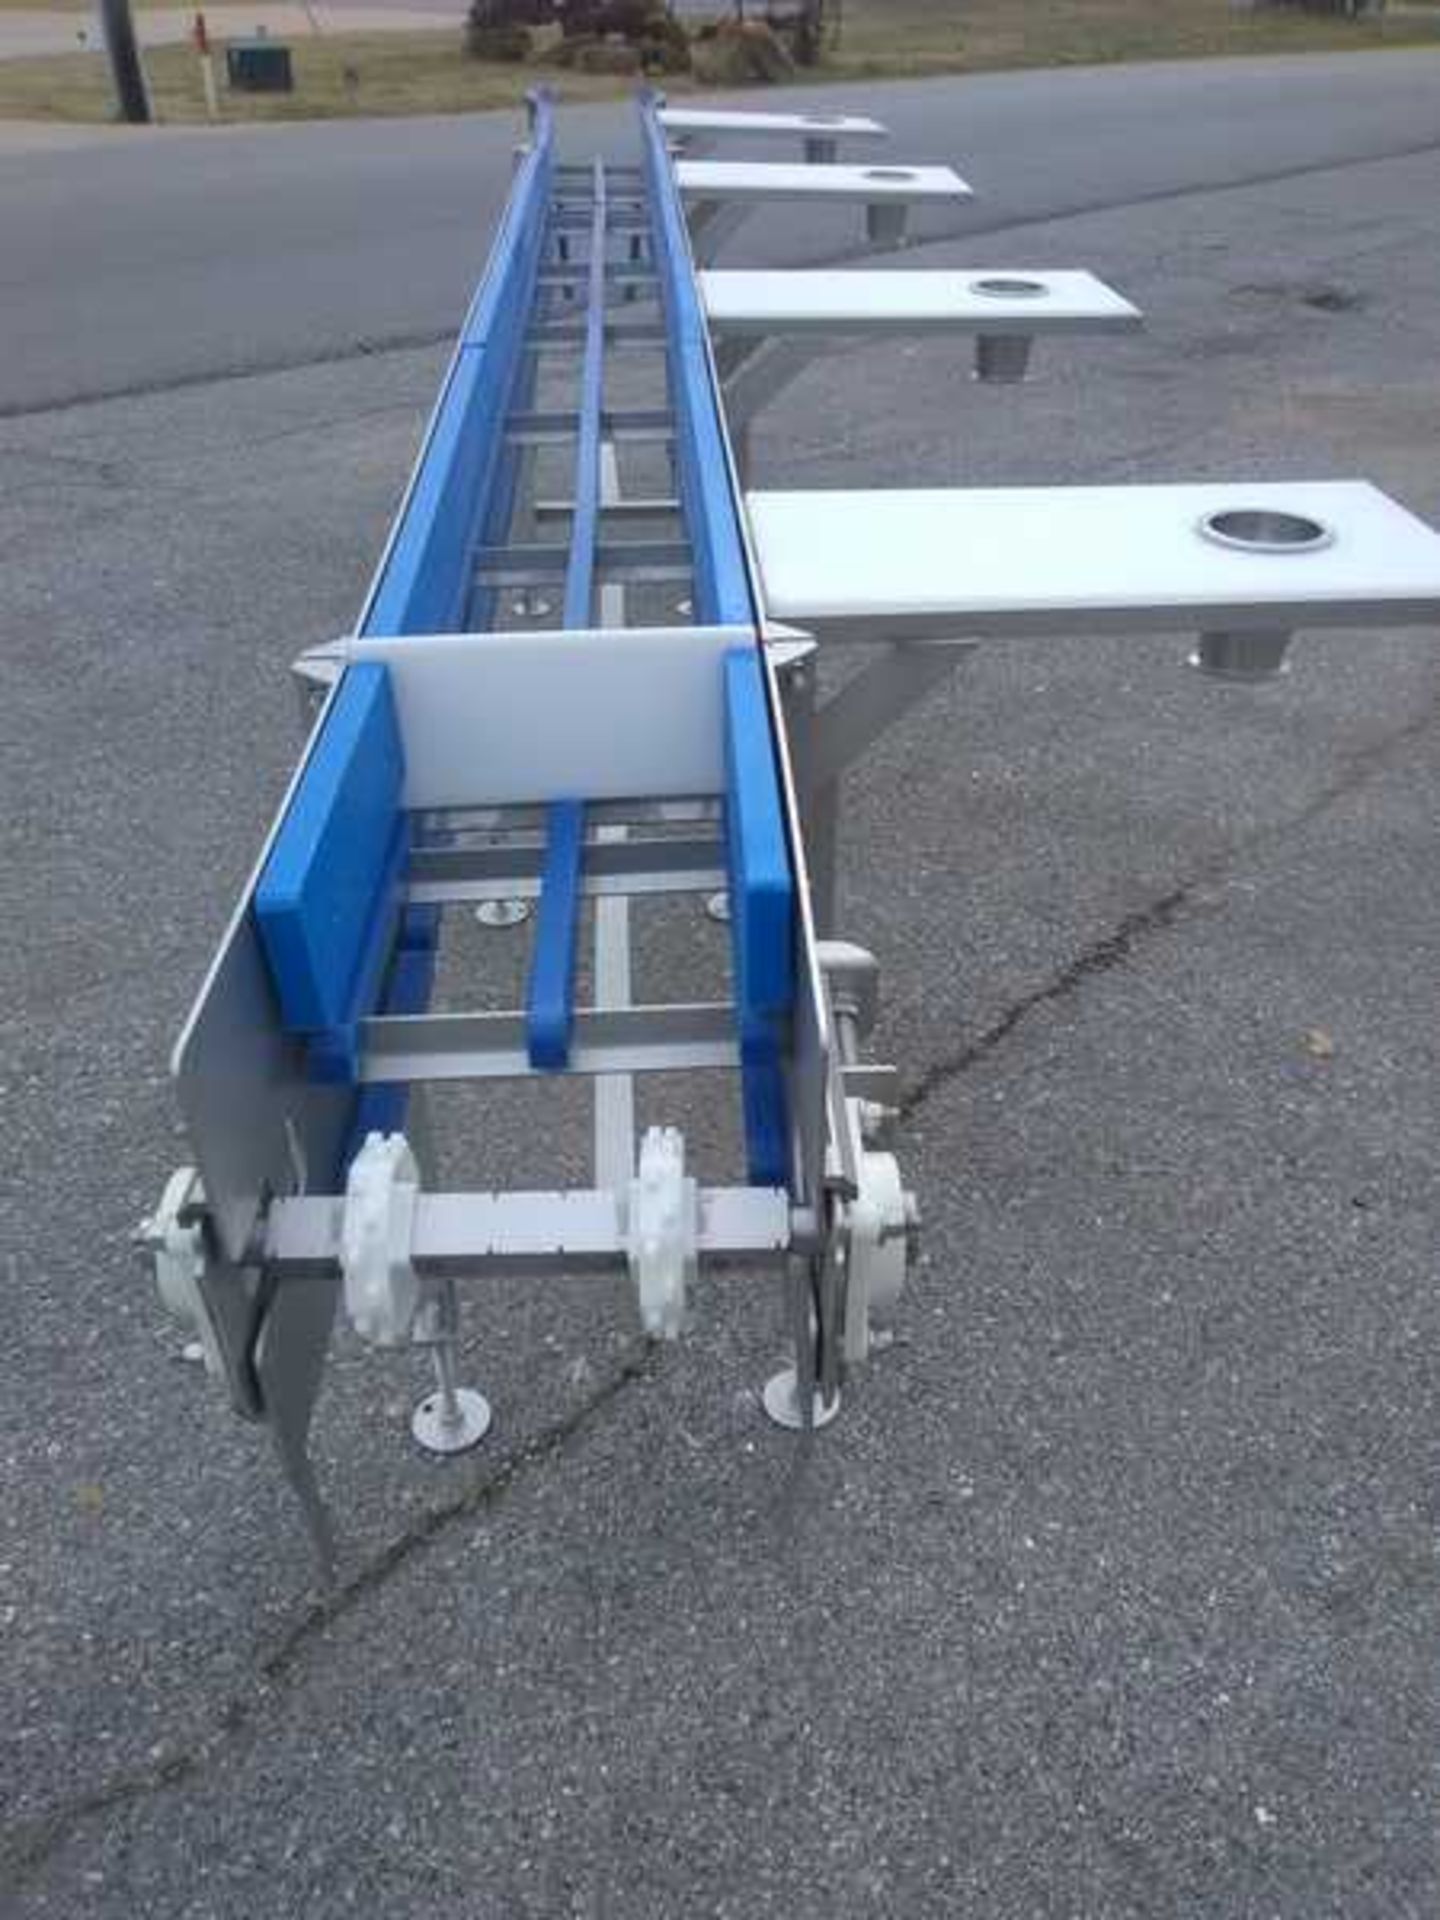 24'L x 12" W Sort and Elevate Conveyor - Image 3 of 5